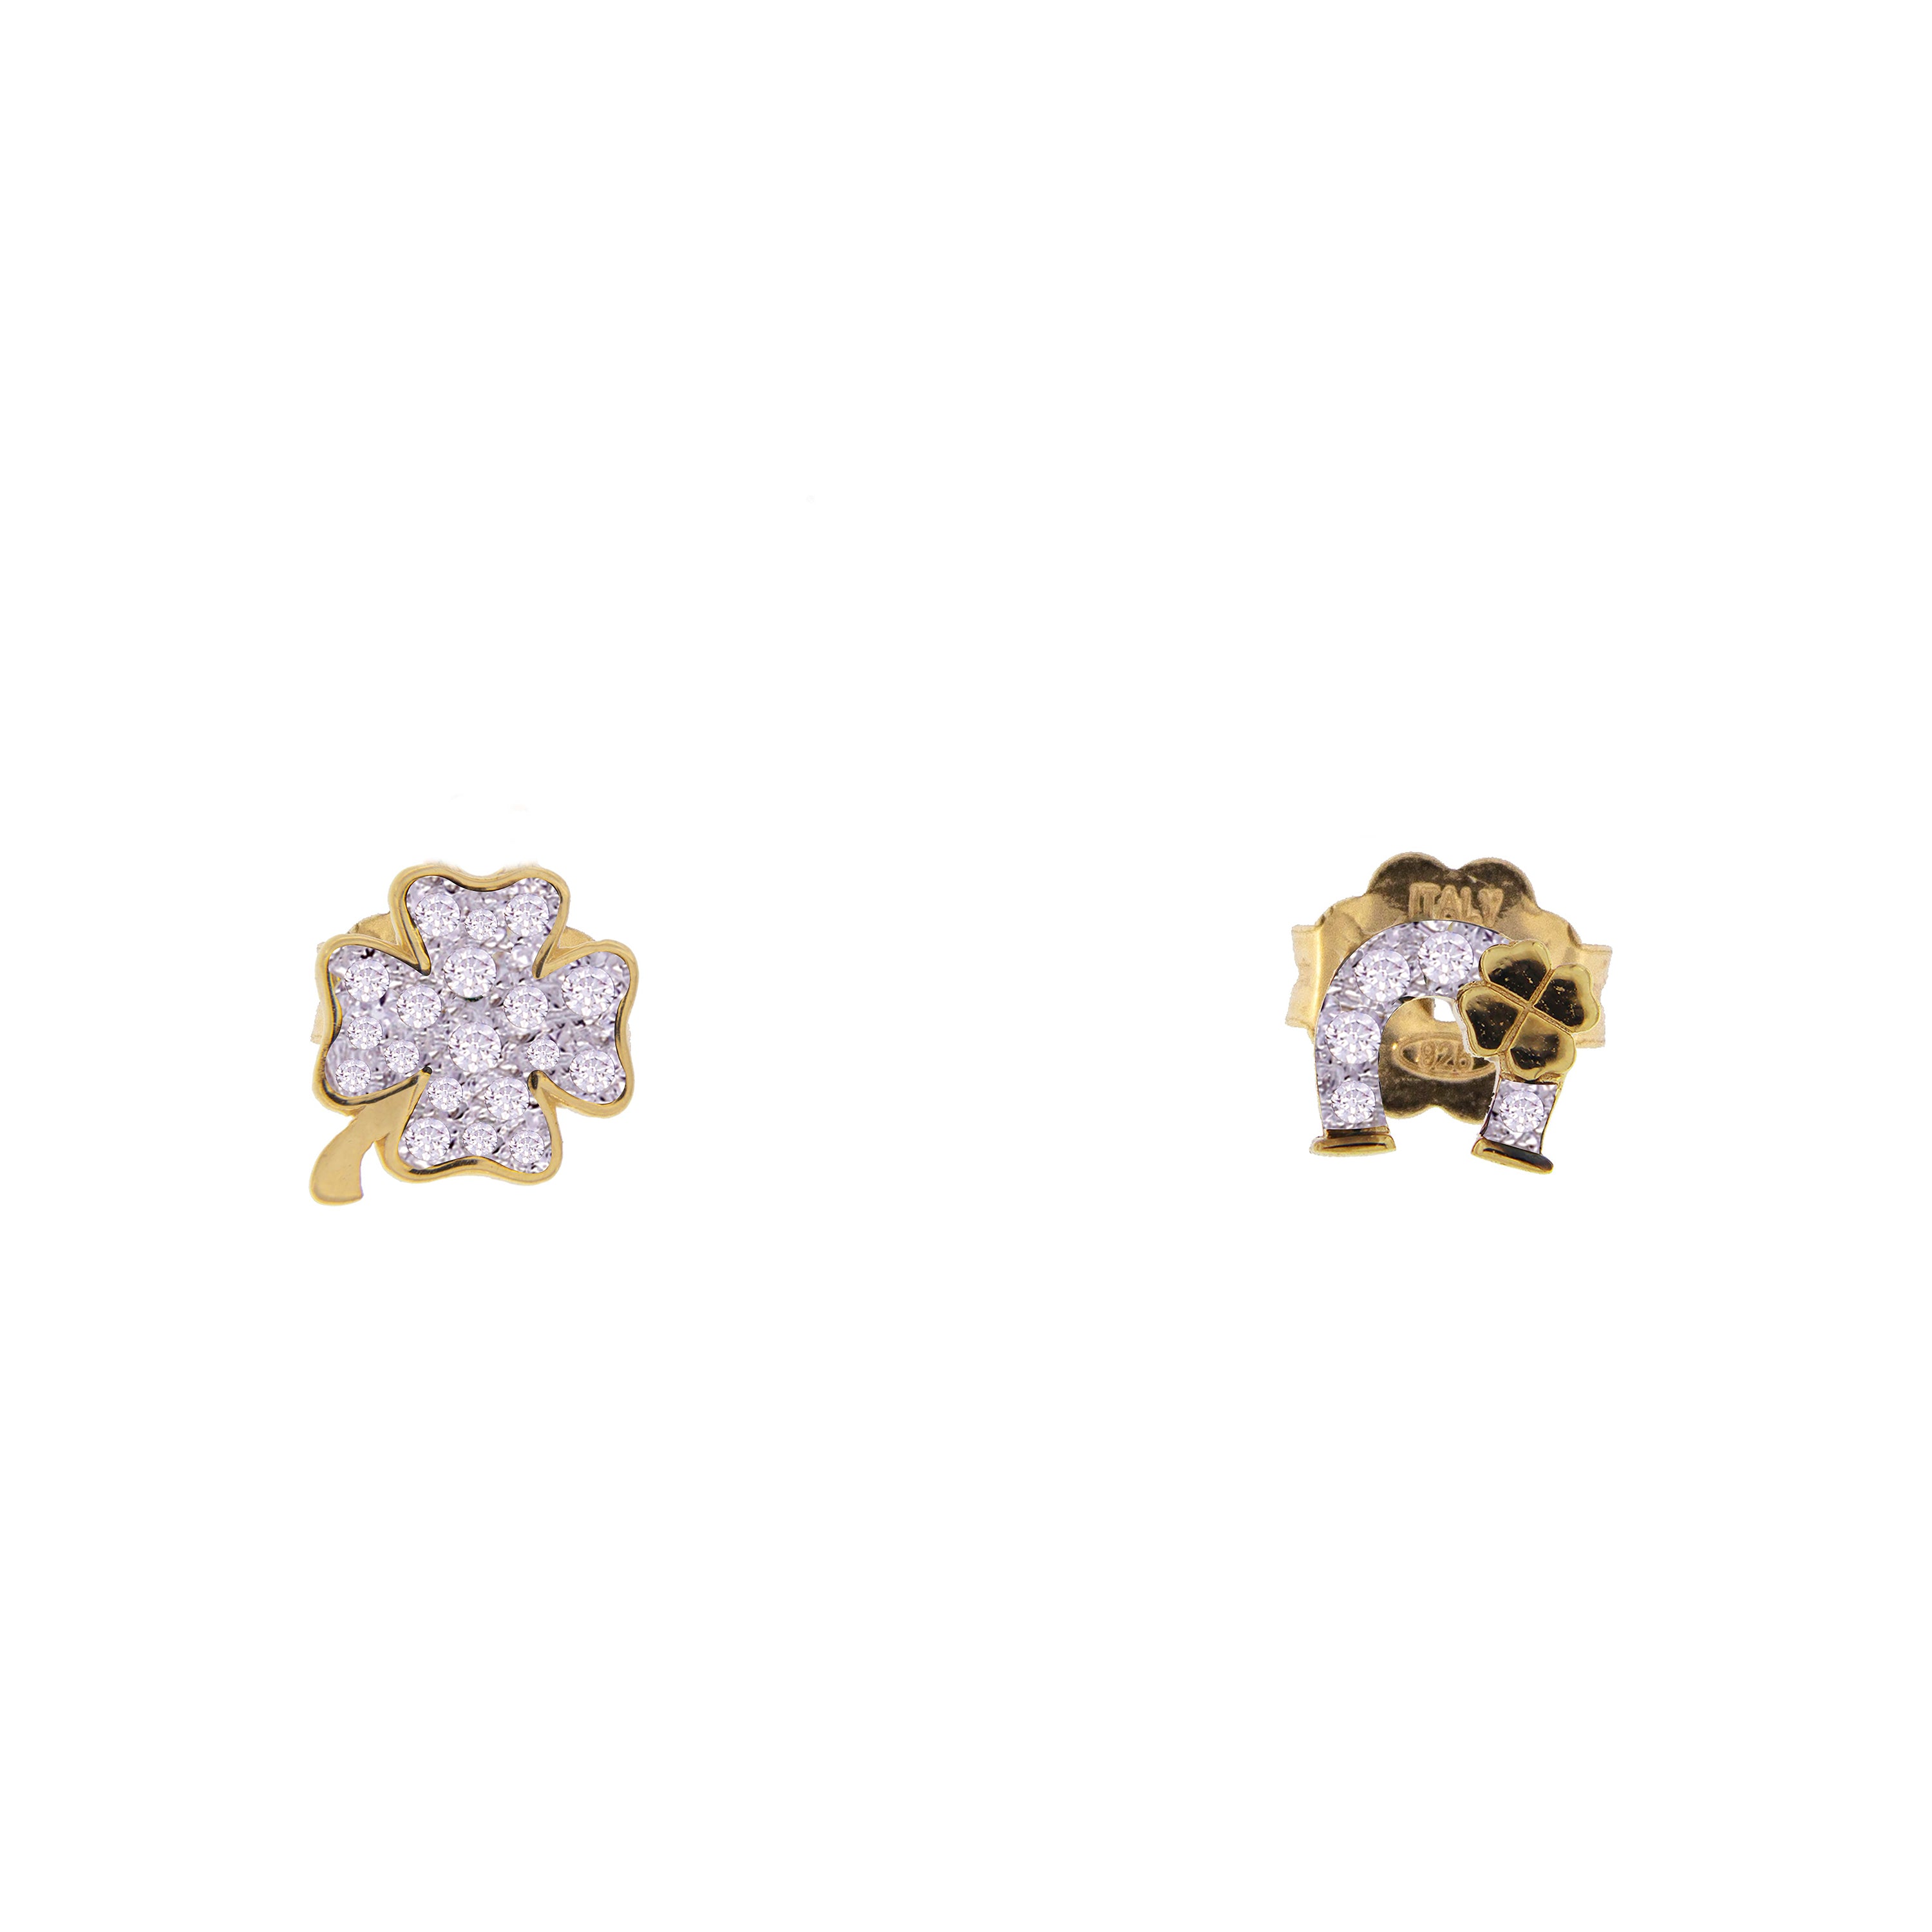 Stud Earrings with Zirconia Four-leaf Clover/Horseshoe